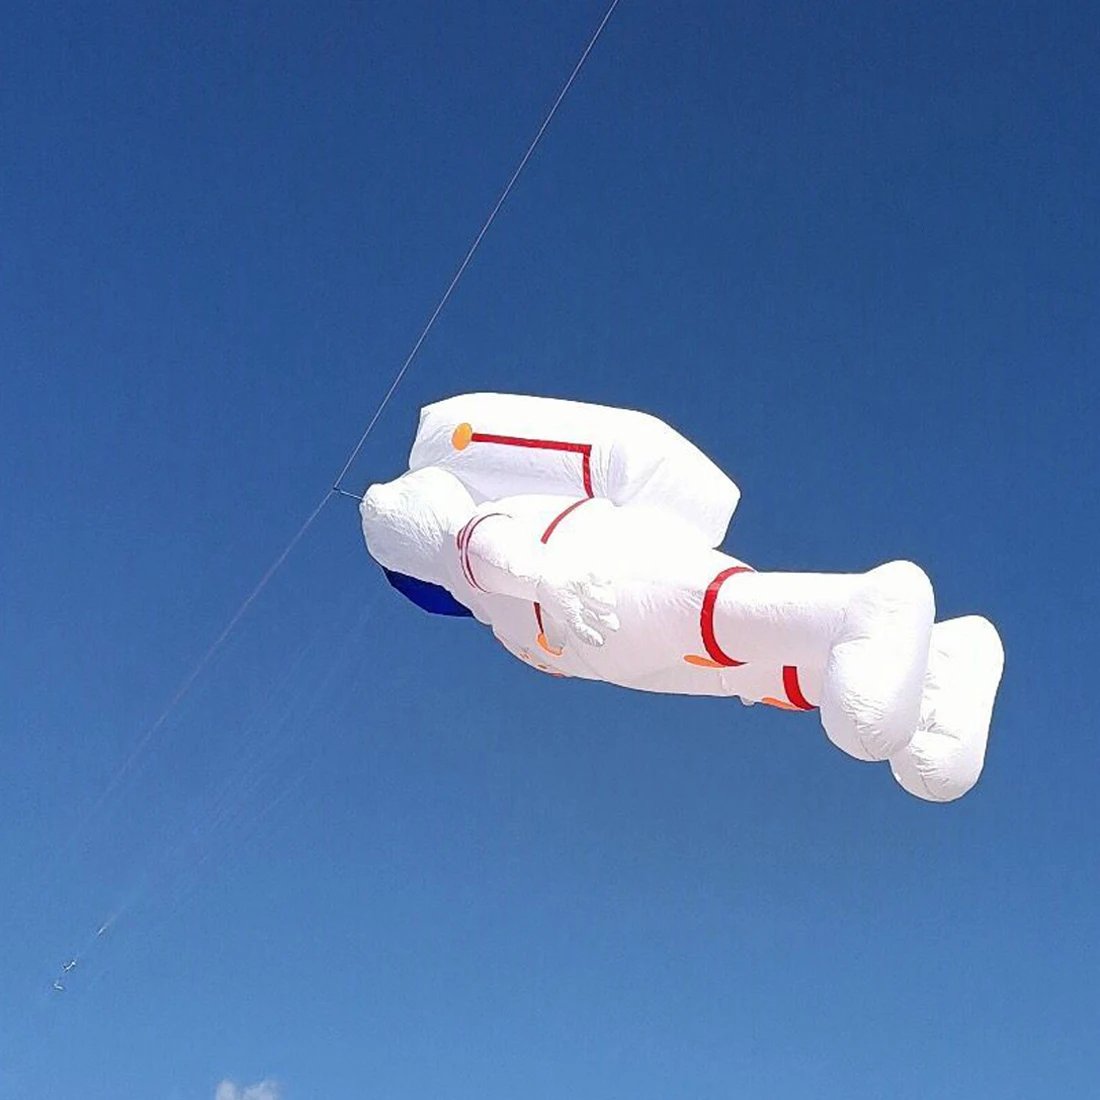 9KM 4m Astronaut Kite Soft Inflatable Line Laundry Kite 30D Ripstop Nylon with Bag for Kite Festival (Accept wholesale)